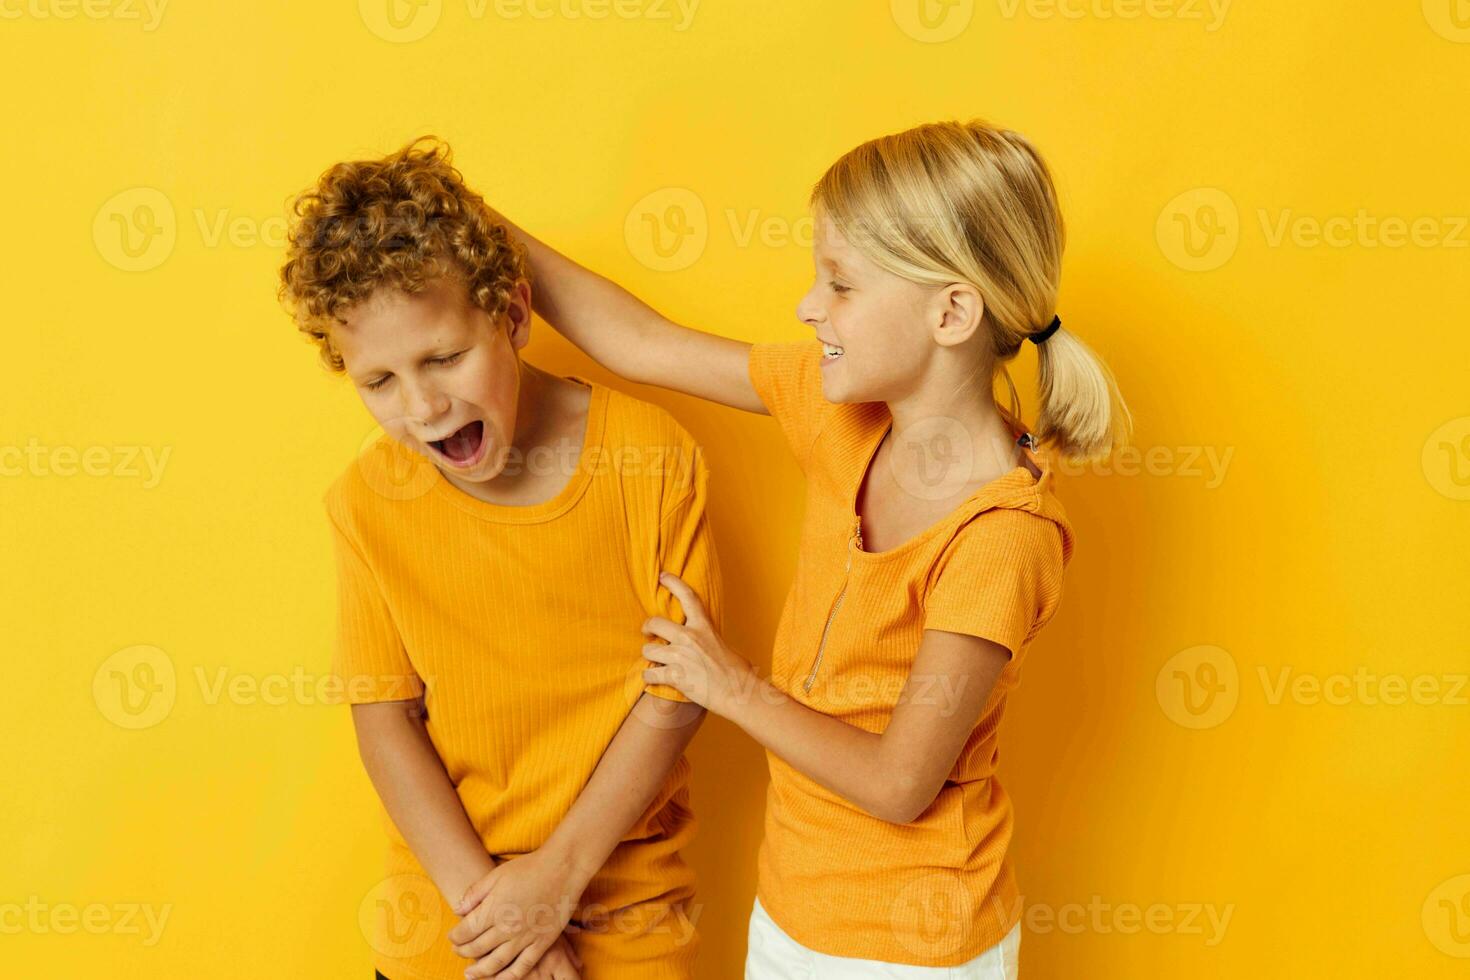 Portrait of cute children in yellow t-shirts standing side by side childhood emotions yellow background unaltered photo